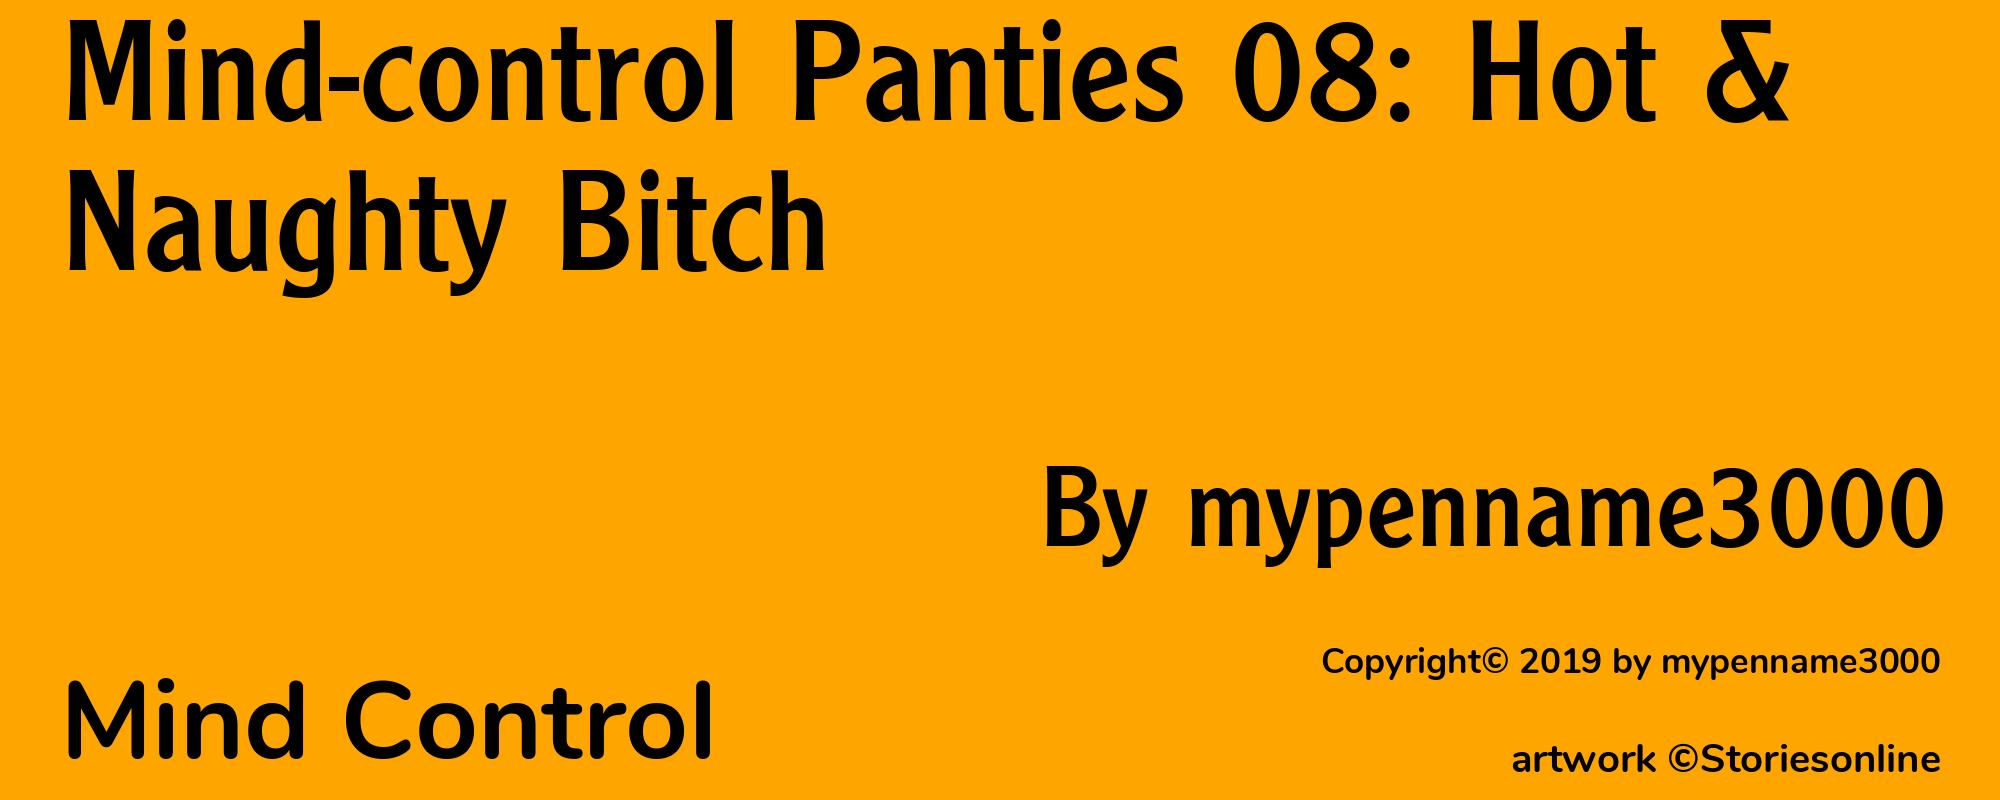 Mind-control Panties 08: Hot & Naughty Bitch - Cover